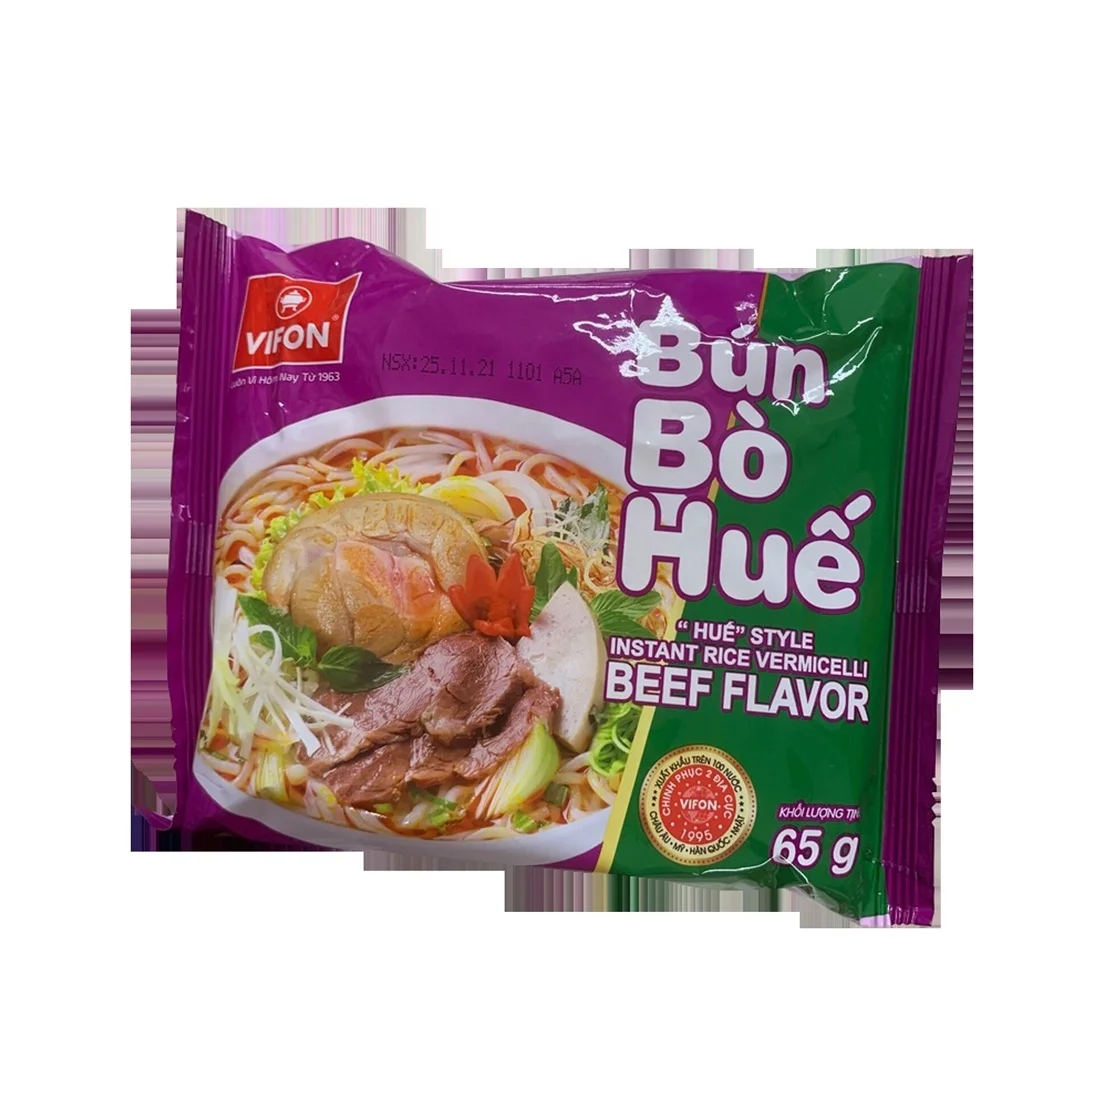 Vietnam Instant Noodles Cheap Price  Vifon Hue Style instant rice vermicelli healthy variety tastes Beef flavor  65g (10000008317271)